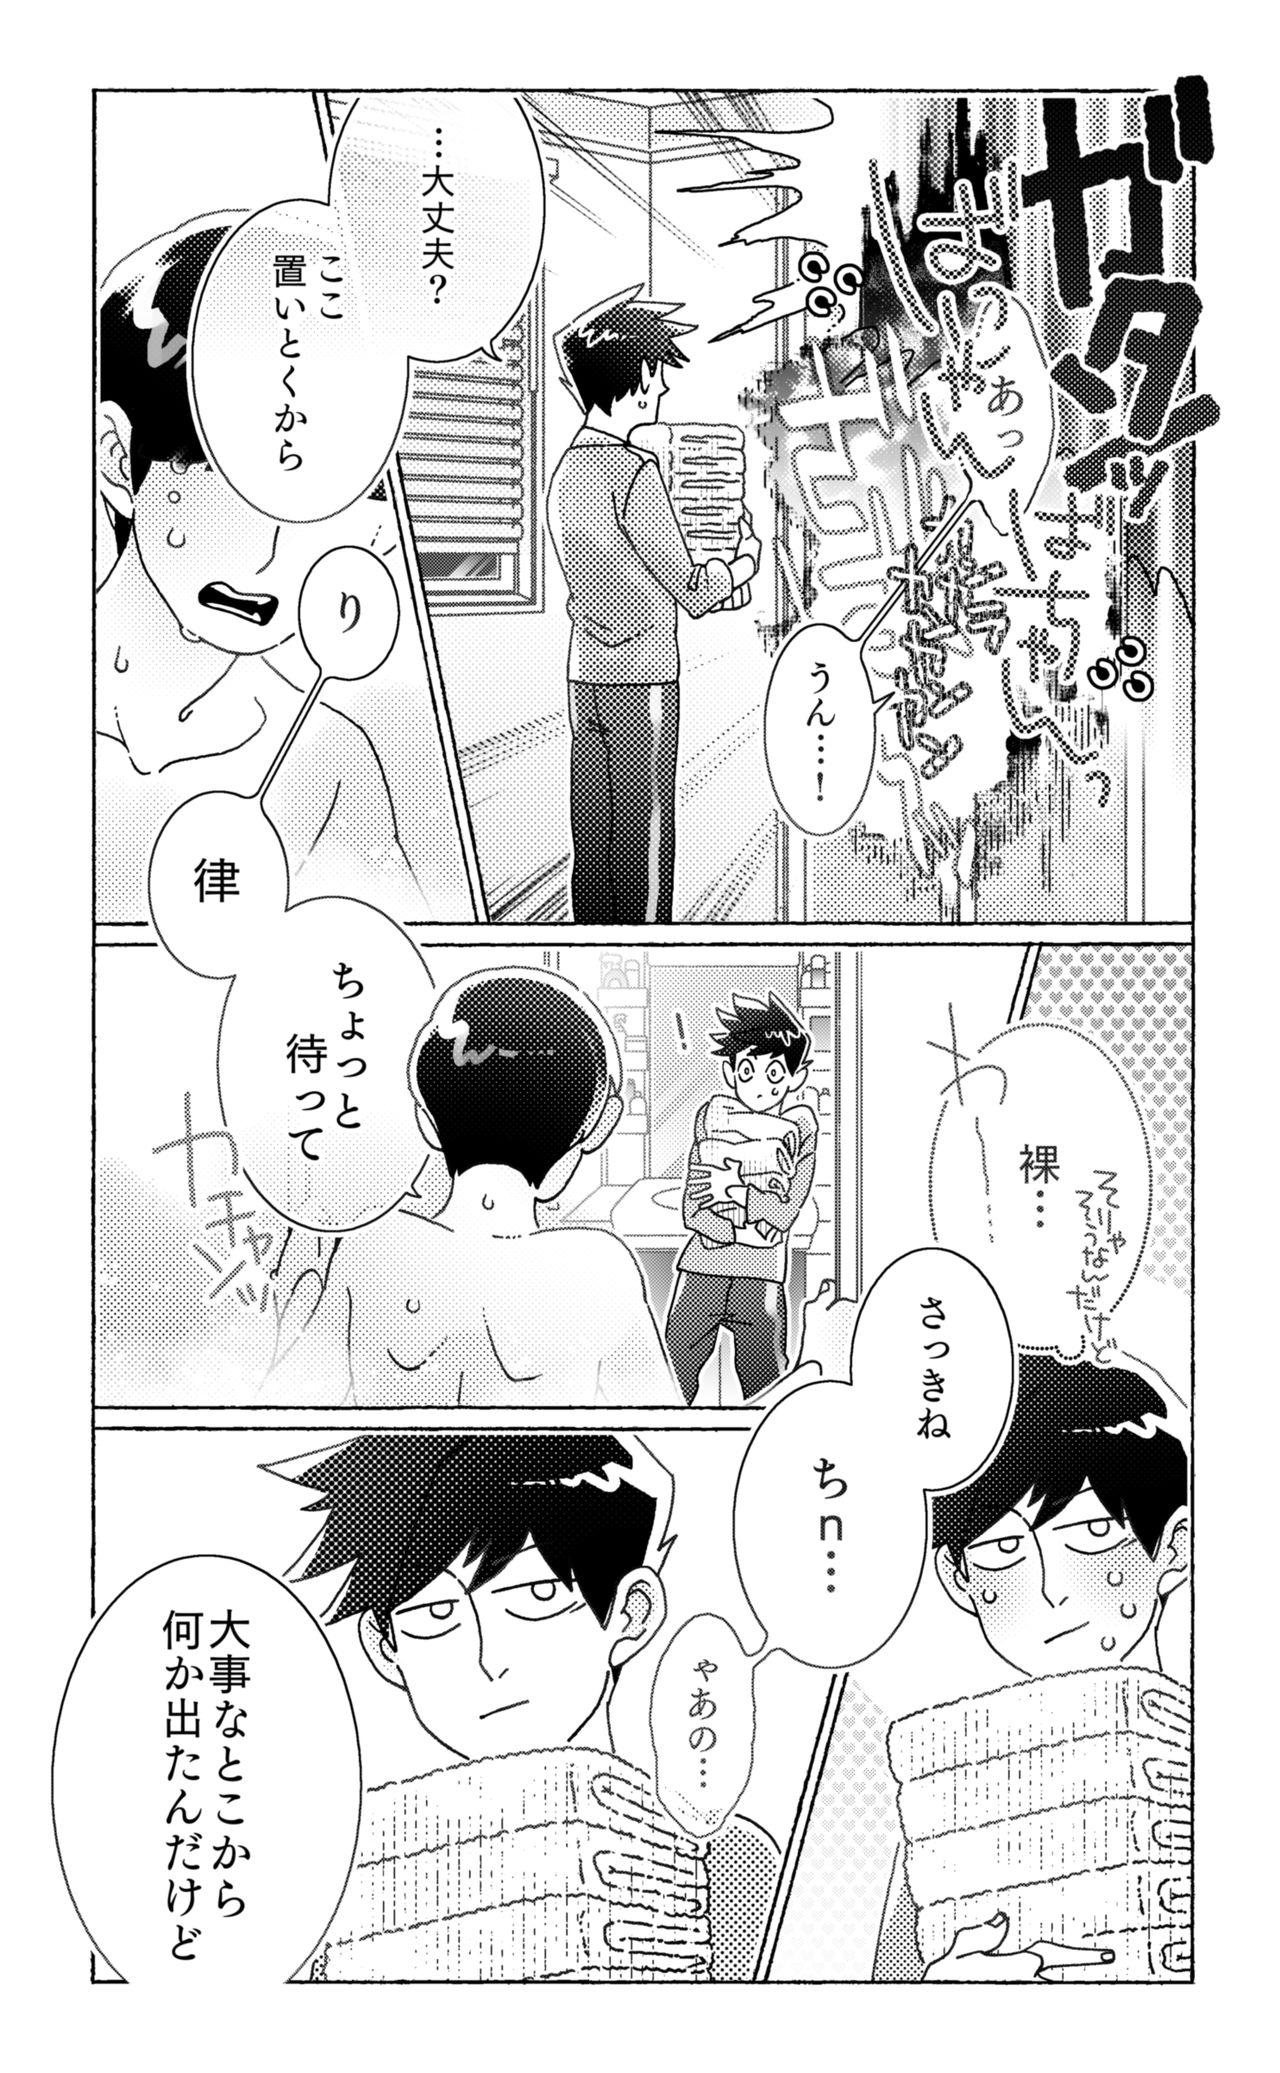 Sola Sittemiyou Yattemiyou - Let's Know Let's Try - Mob psycho 100 Close - Page 4